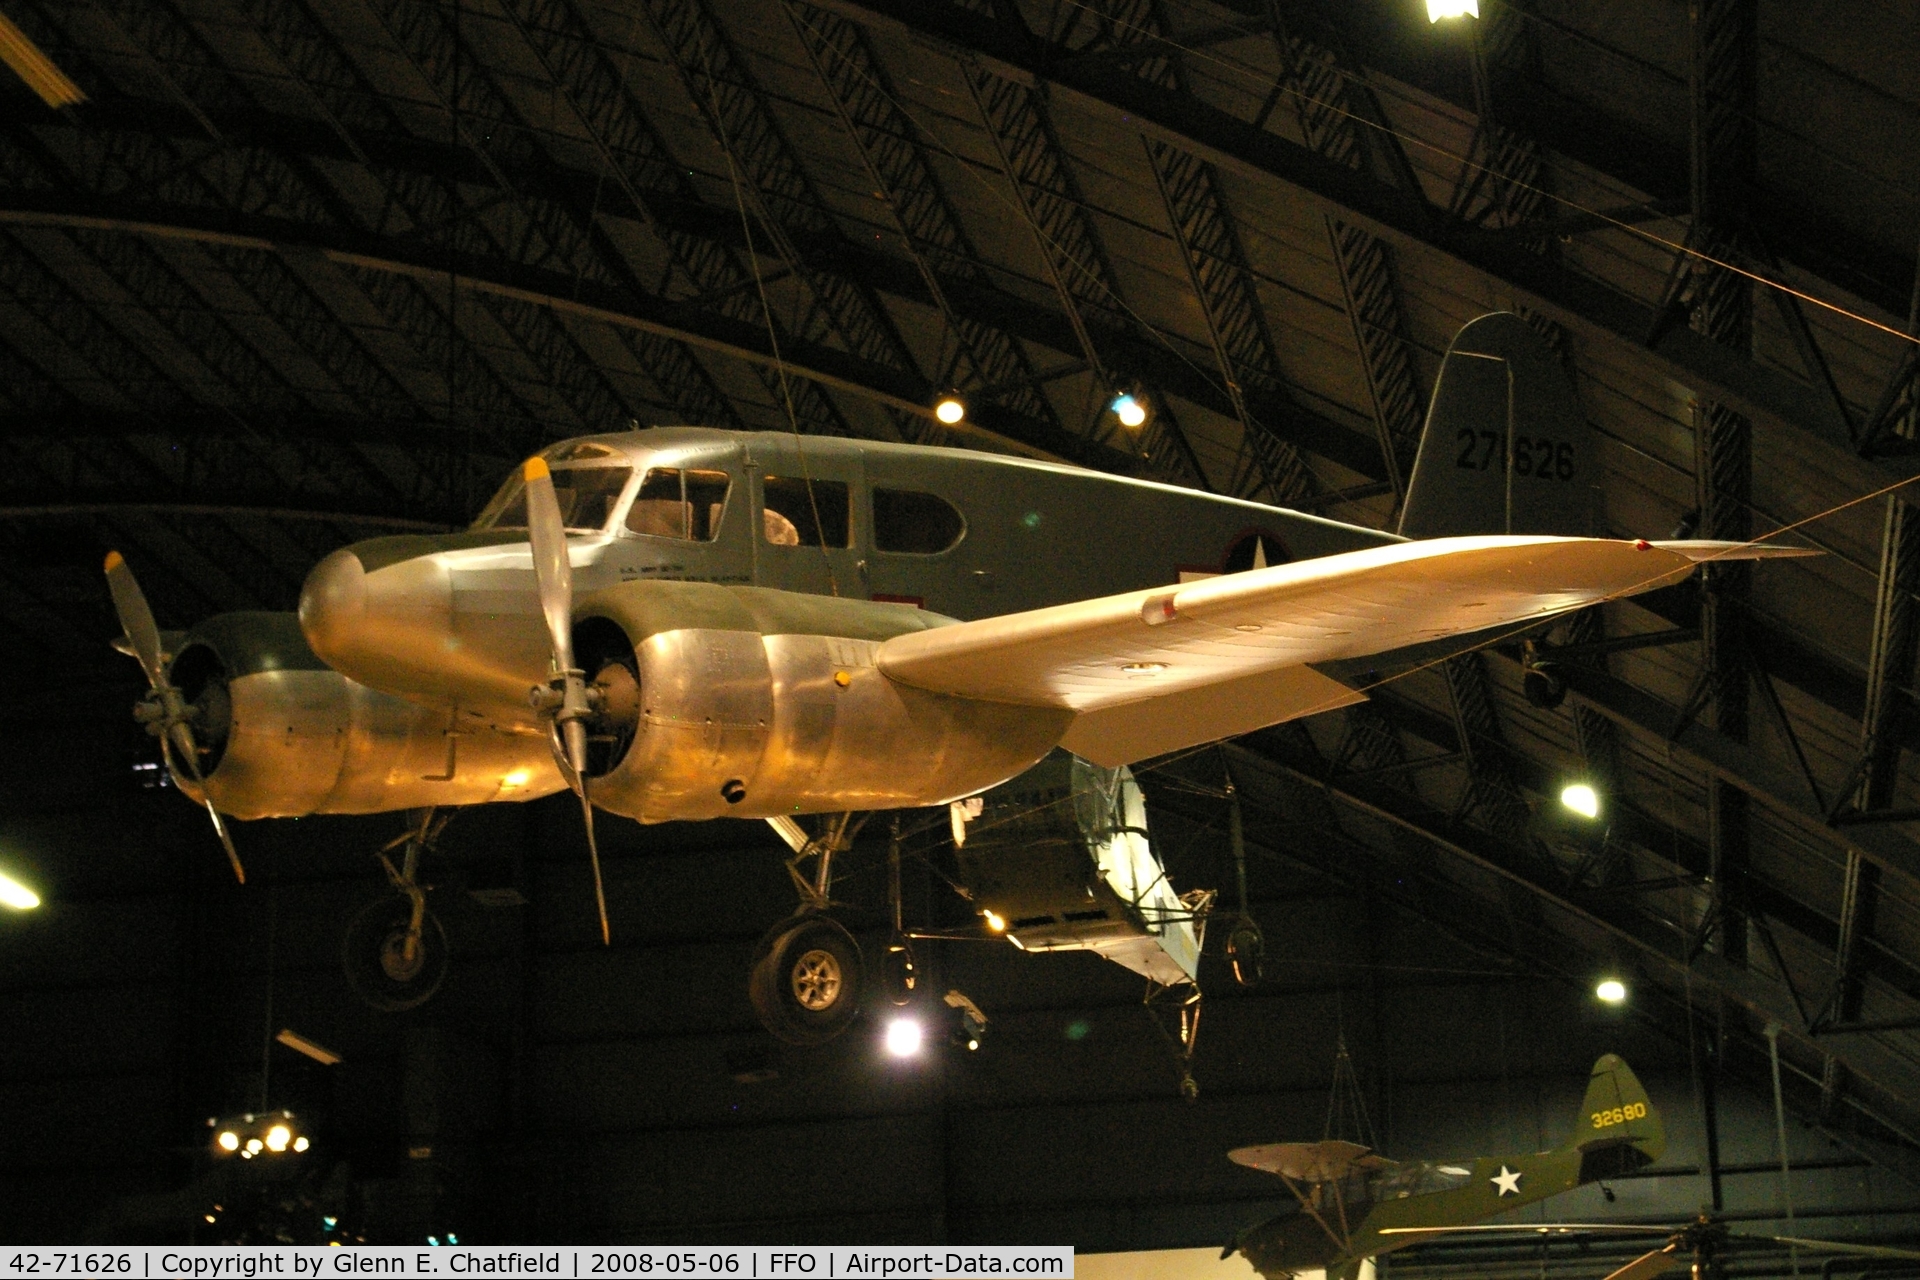 42-71626, 1942 Cessna UC-78B Bobcat Bobcat C/N 4322, Hanging from the ceiling in the National Museum of the U.S. Air Force